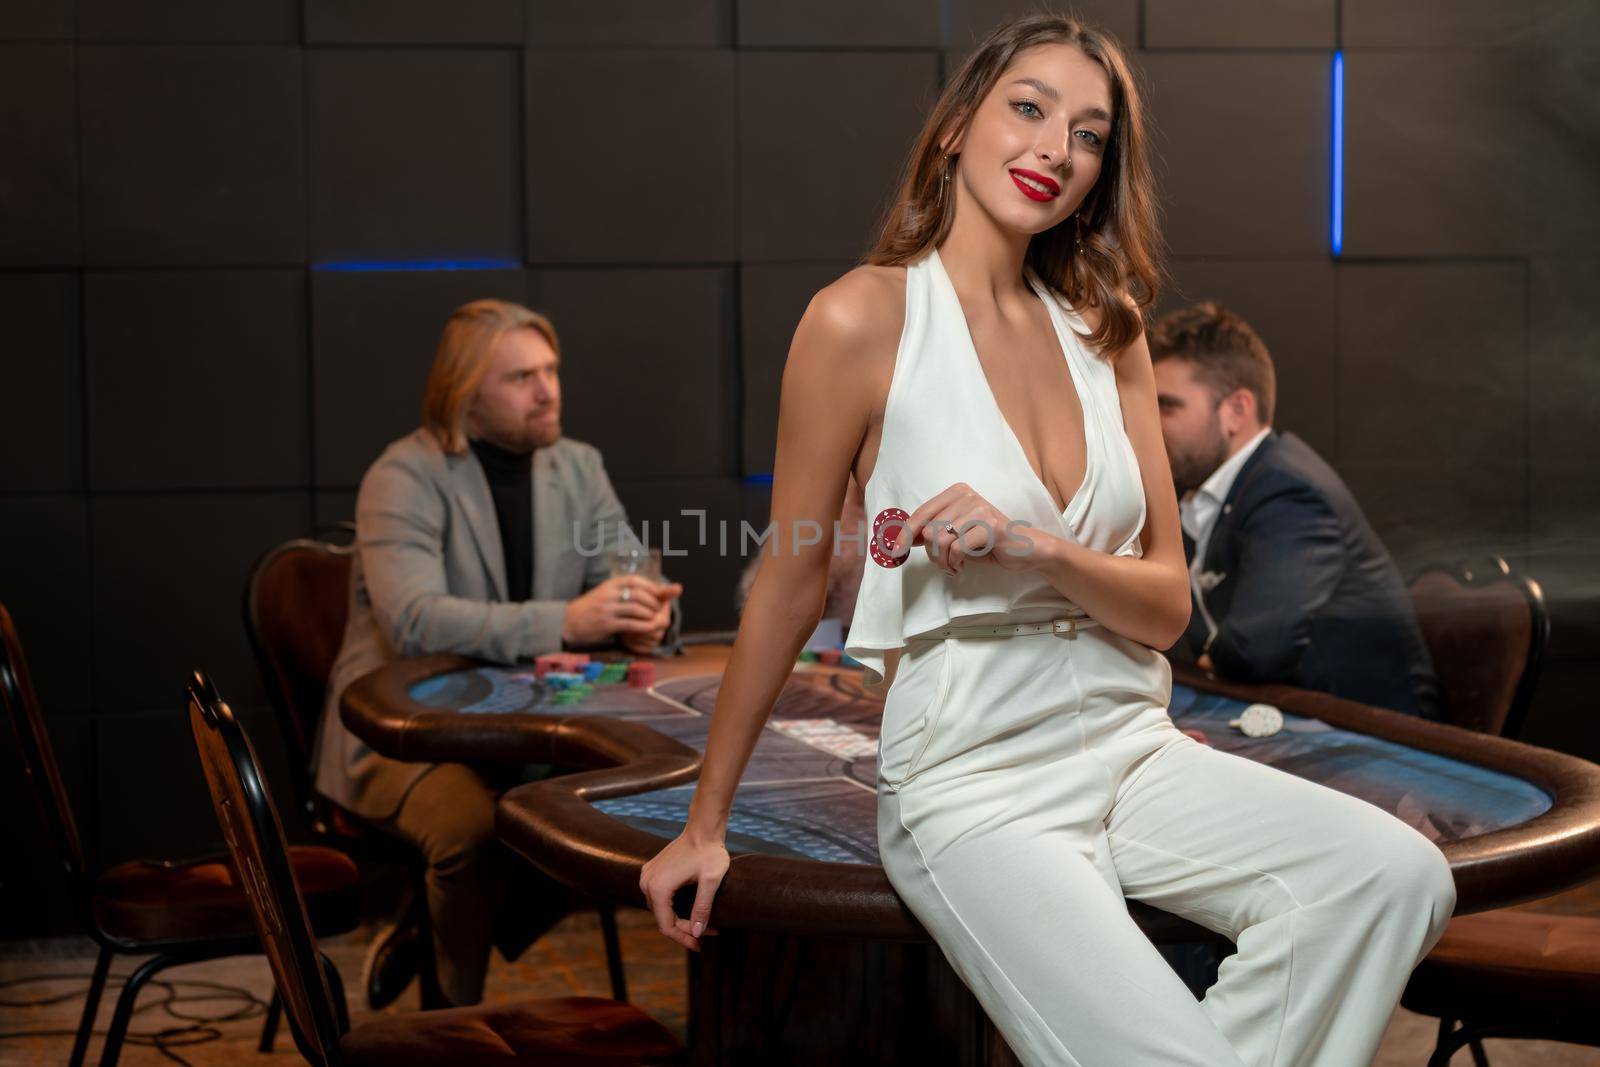 Portrait of smiling attractive young woman in stylish white jumpsuit sitting on edge of poker table in gambling establishment room with other players in background, holding betting chips